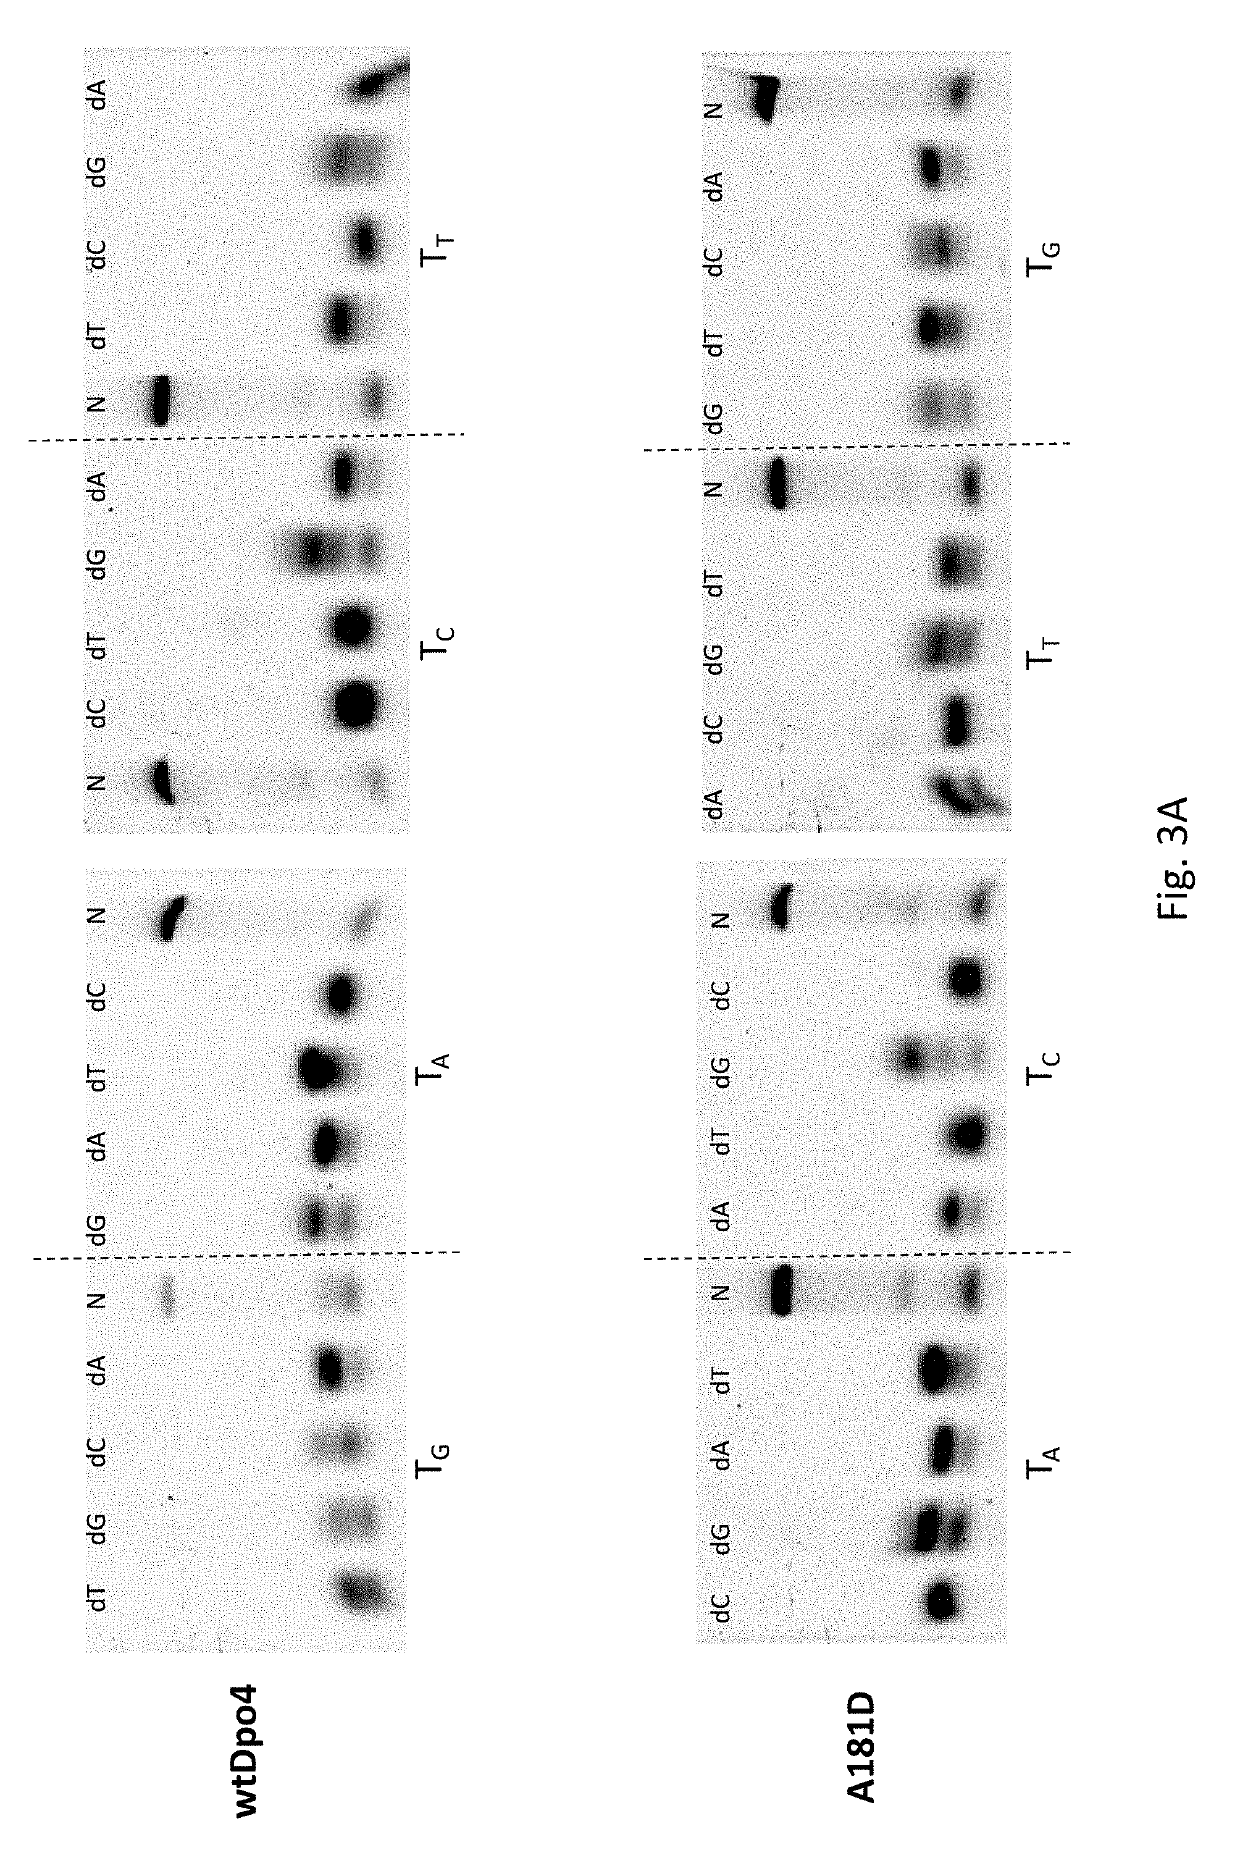 DNA Polymerase Mutants with Increased Processivity of DNA Synthesis